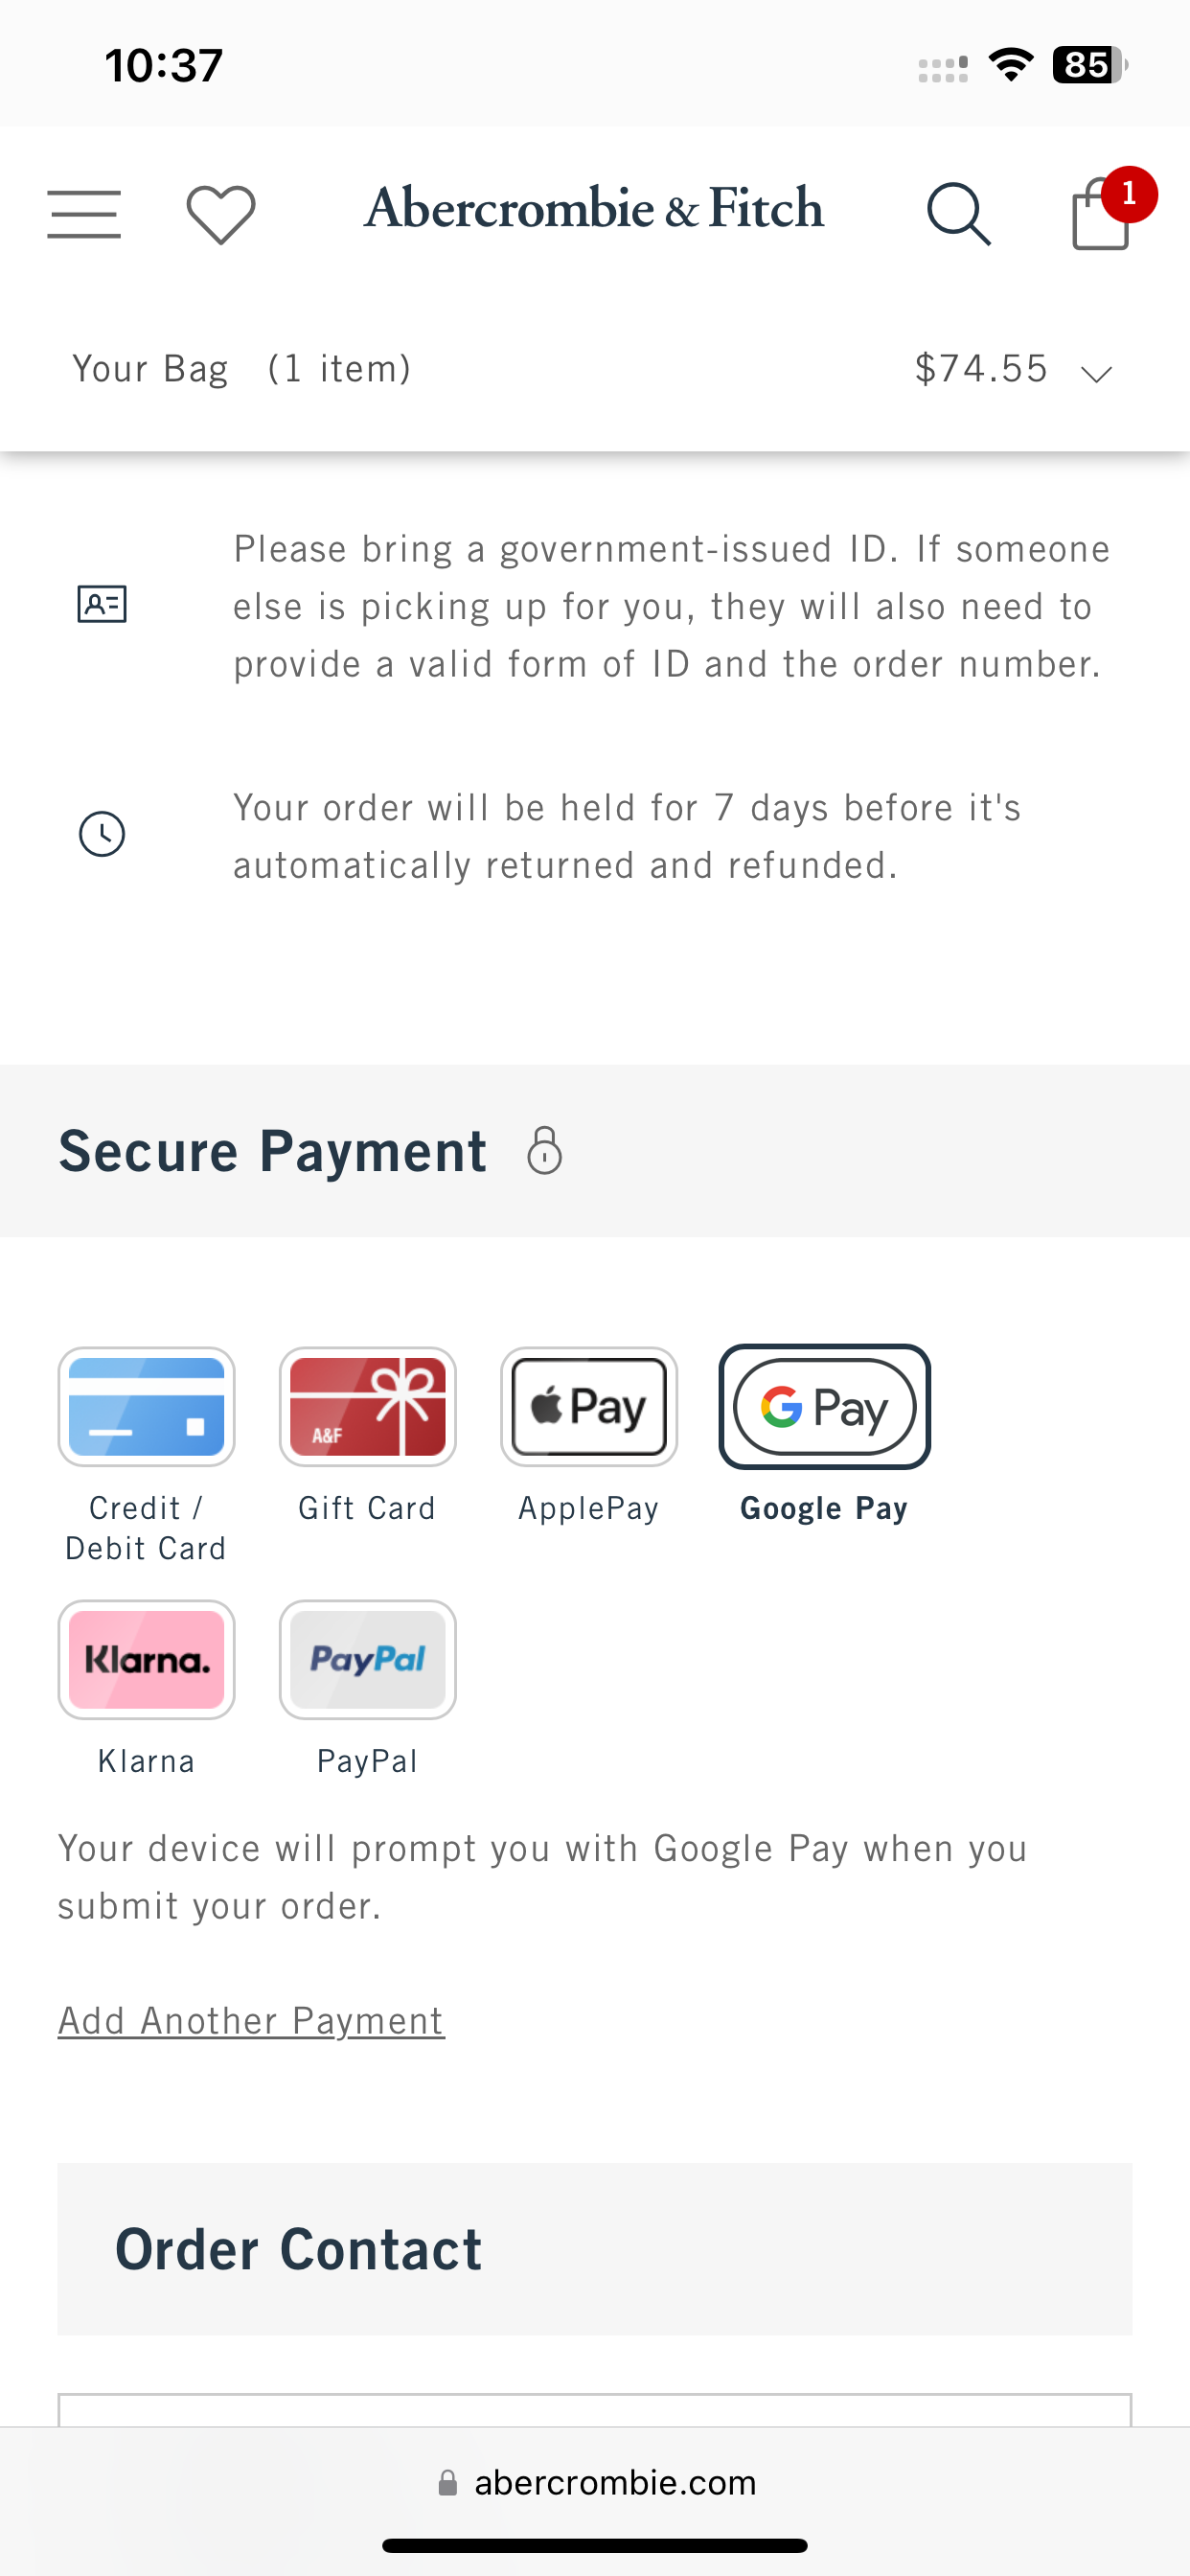 Abercrombie & Fitch accepts Google Pay & Apple Pay online.